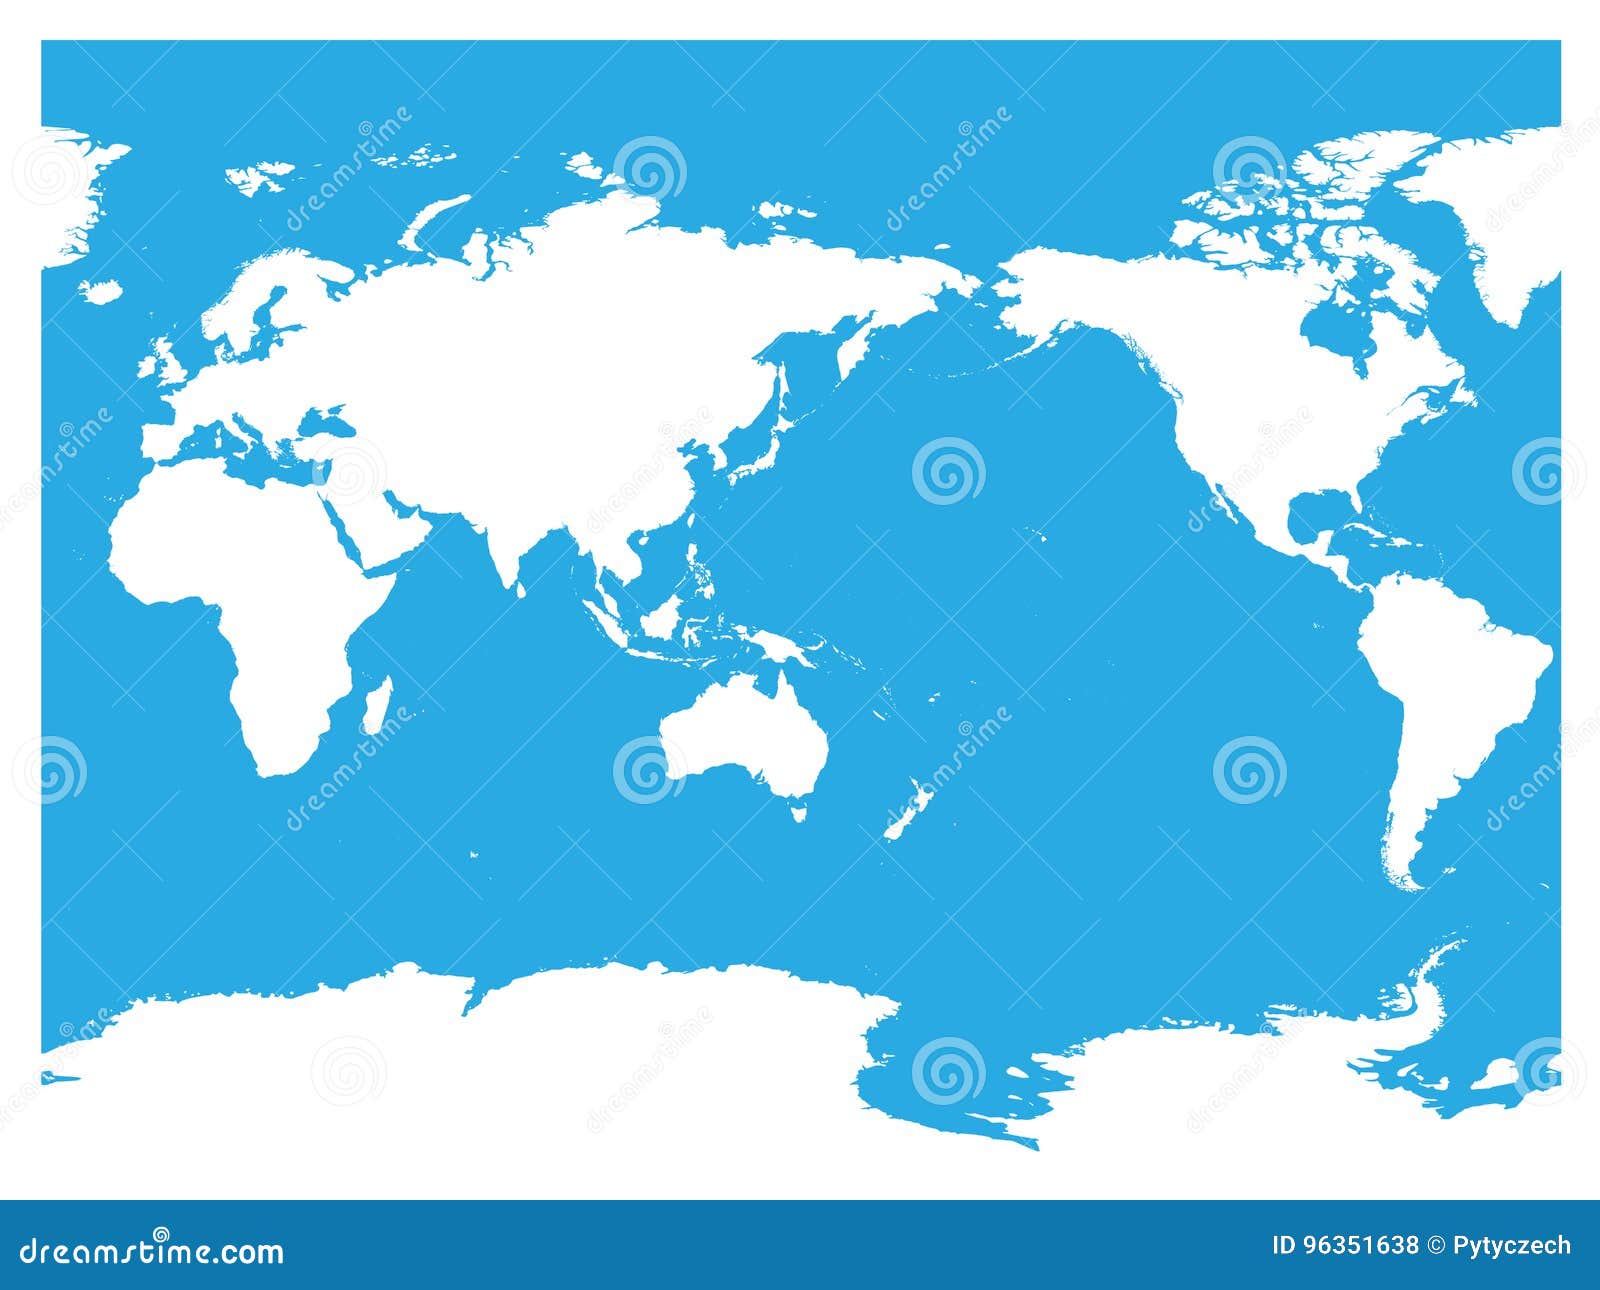 australia and pacific ocean centered world map. high detail white silhouette on blue background.  